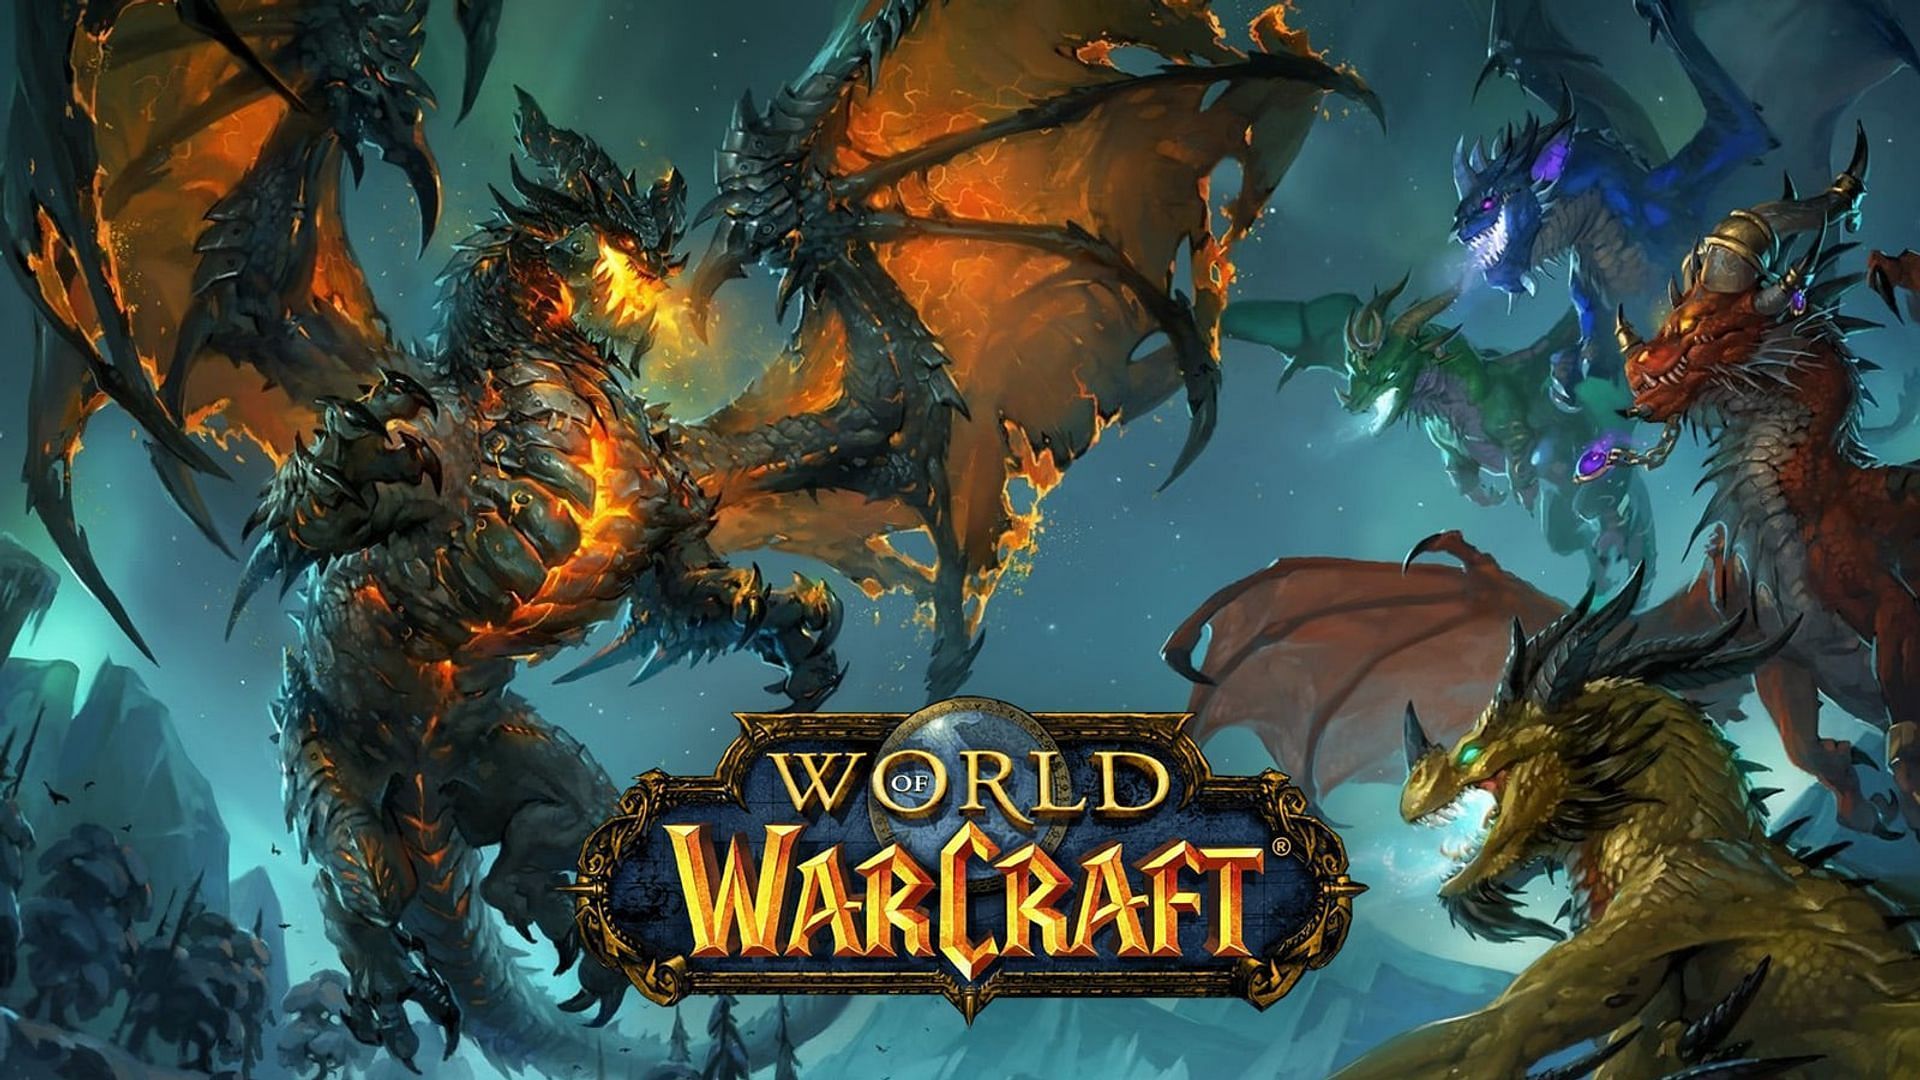 Official artwork for World of Warcraft: Dragonflight (Image via Blizzard Entertainment)